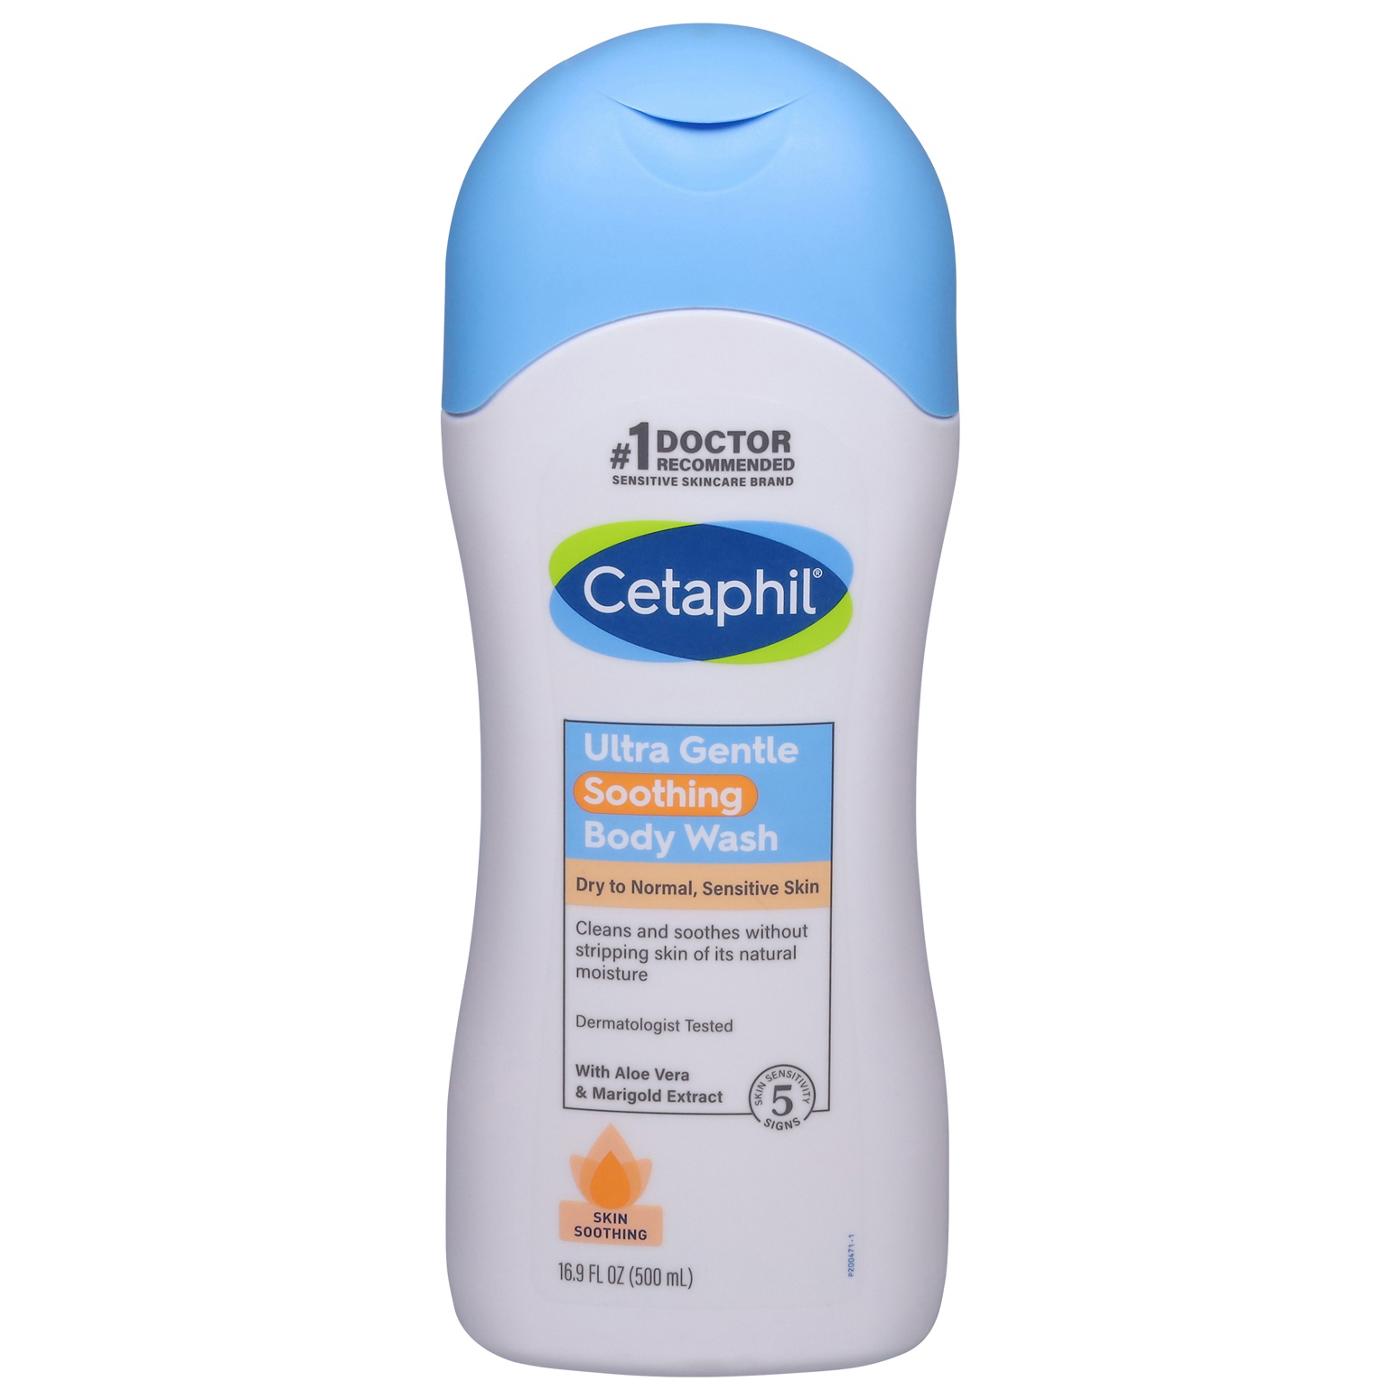 Cetaphil Ultra Gentle Soothing Body Wash; image 1 of 3